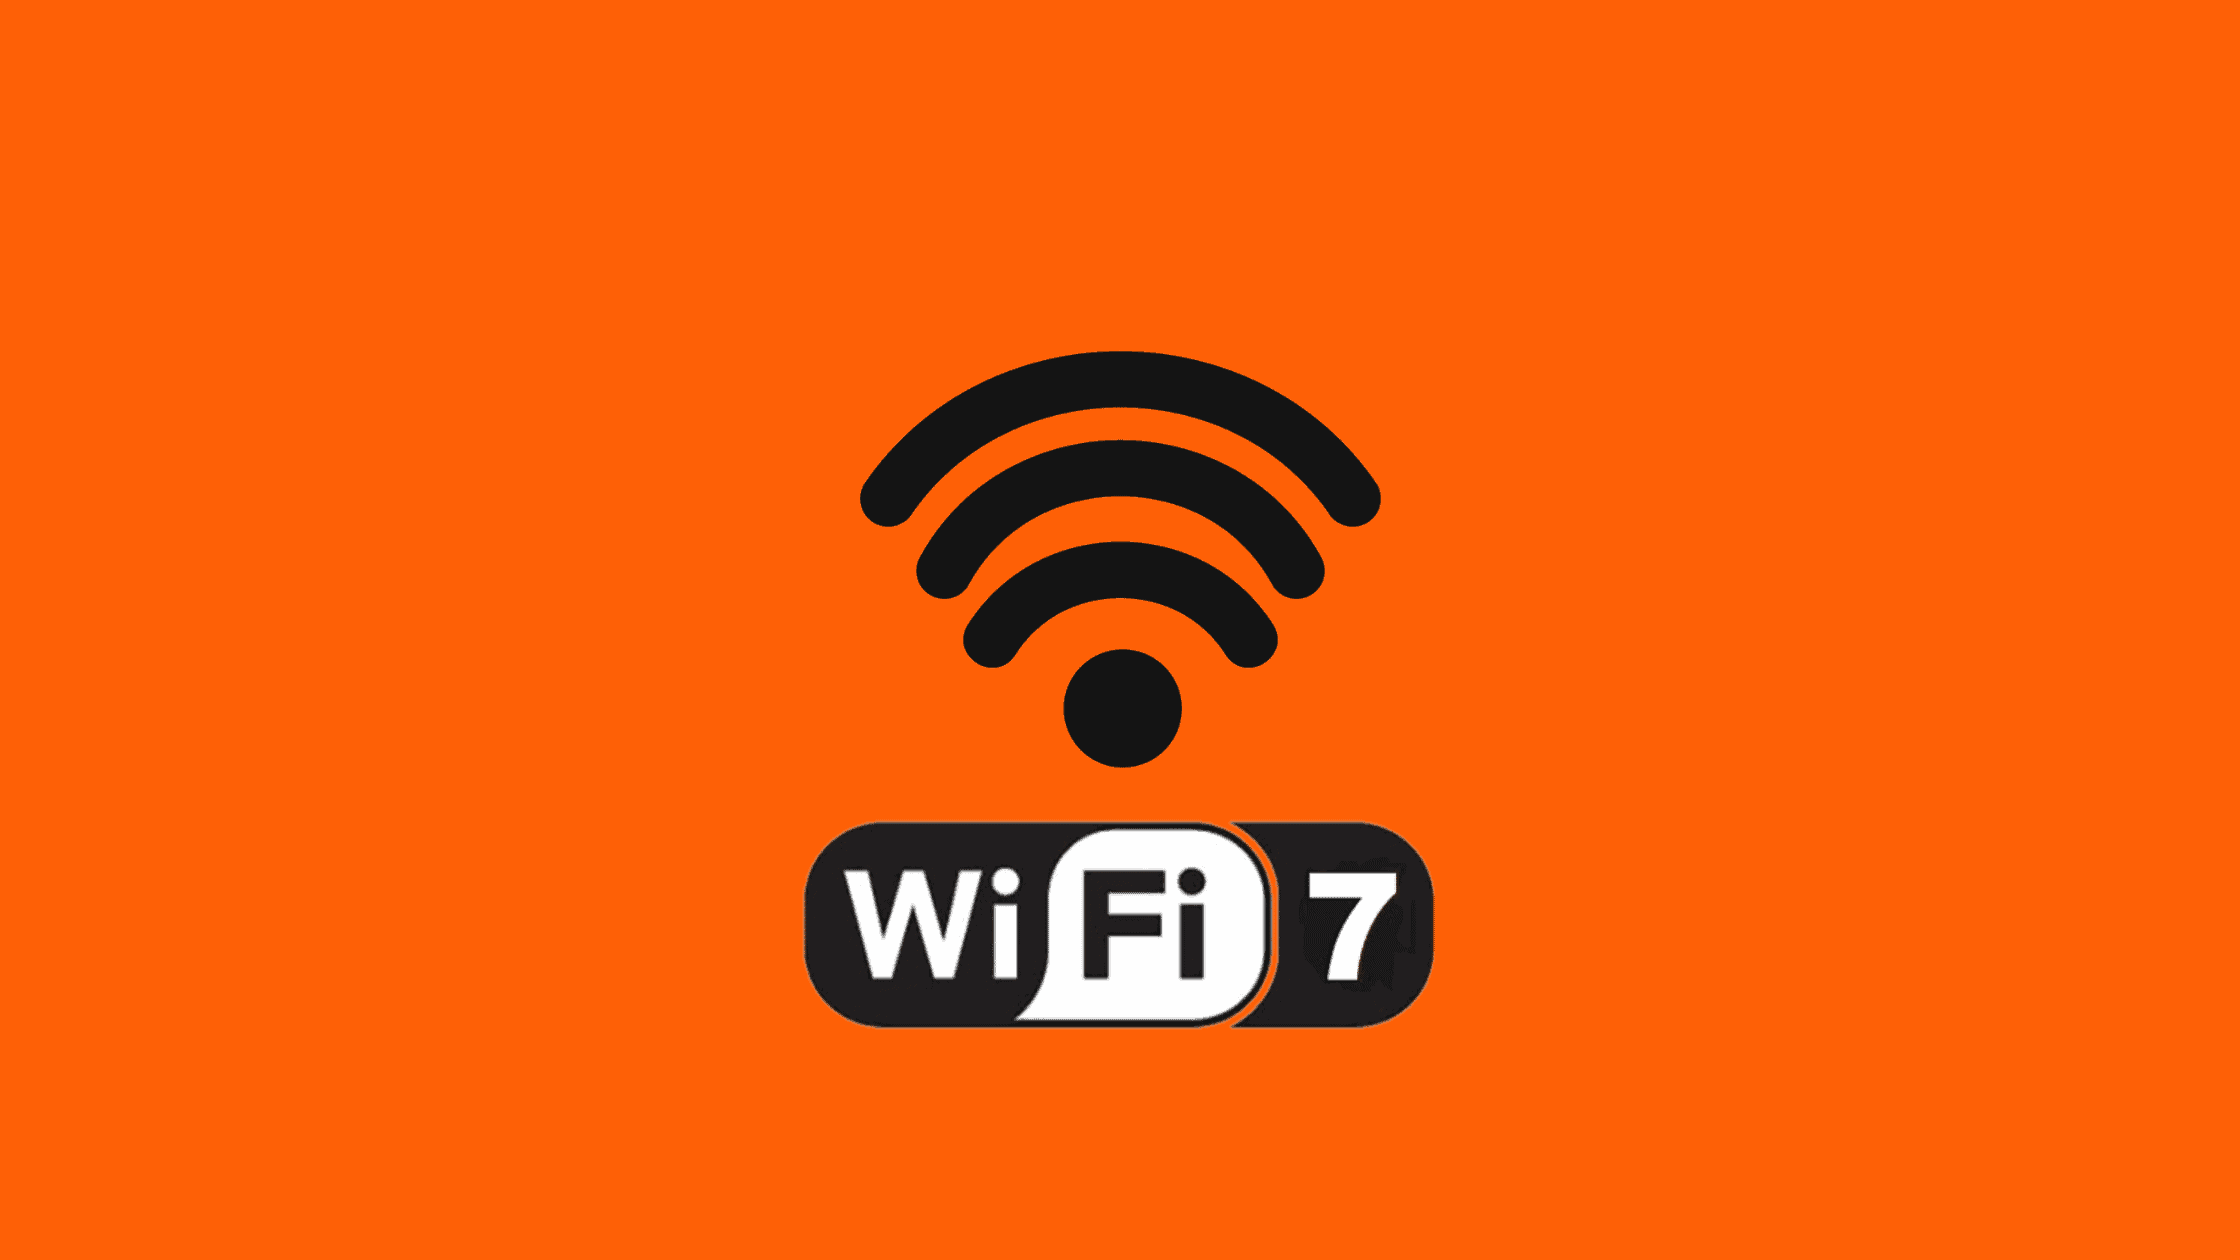 What Is Wi Fi 7 Wi Fi 802 11be What Are The New Features Of Wi Fi 7 And How Wi Fi 7 Is Better Than Wi Fi 6_6e